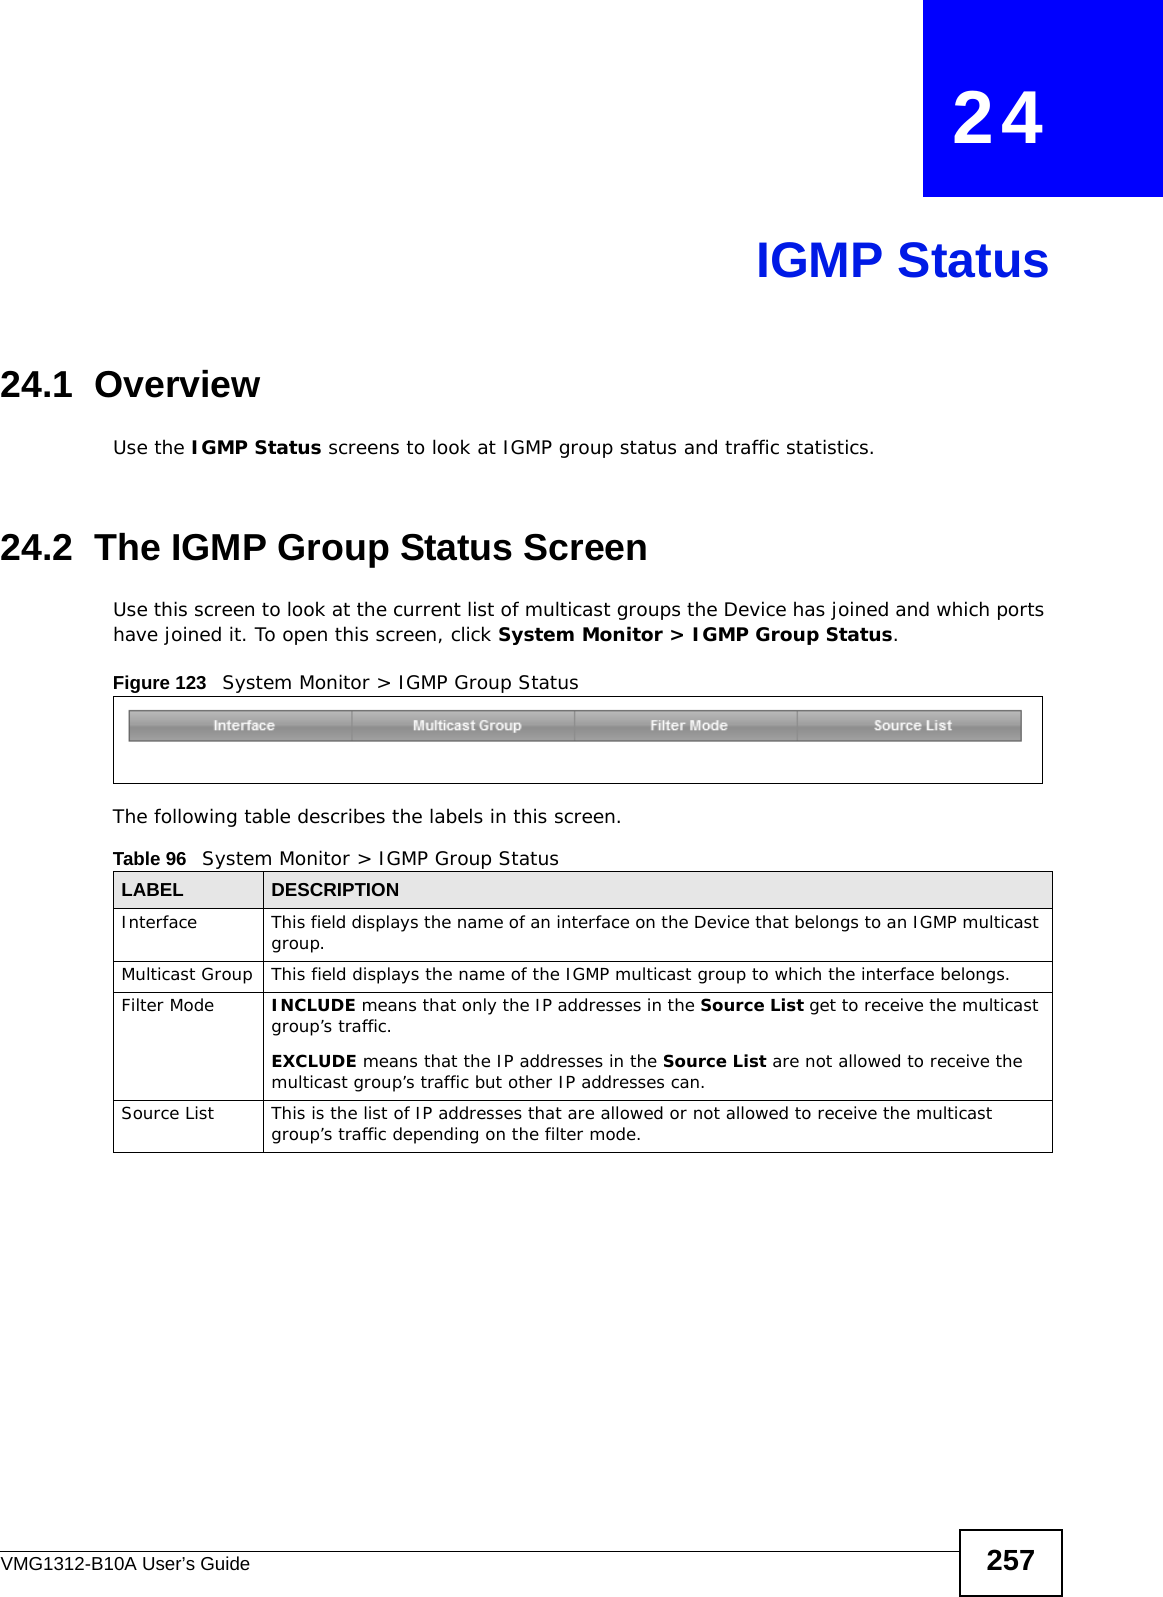 VMG1312-B10A User’s Guide 257CHAPTER   24IGMP Status24.1  OverviewUse the IGMP Status screens to look at IGMP group status and traffic statistics. 24.2  The IGMP Group Status ScreenUse this screen to look at the current list of multicast groups the Device has joined and which ports have joined it. To open this screen, click System Monitor &gt; IGMP Group Status.Figure 123   System Monitor &gt; IGMP Group StatusThe following table describes the labels in this screen.Table 96   System Monitor &gt; IGMP Group StatusLABEL DESCRIPTIONInterface This field displays the name of an interface on the Device that belongs to an IGMP multicast group. Multicast Group This field displays the name of the IGMP multicast group to which the interface belongs. Filter Mode  INCLUDE means that only the IP addresses in the Source List get to receive the multicast group’s traffic.EXCLUDE means that the IP addresses in the Source List are not allowed to receive the multicast group’s traffic but other IP addresses can.Source List This is the list of IP addresses that are allowed or not allowed to receive the multicast group’s traffic depending on the filter mode.